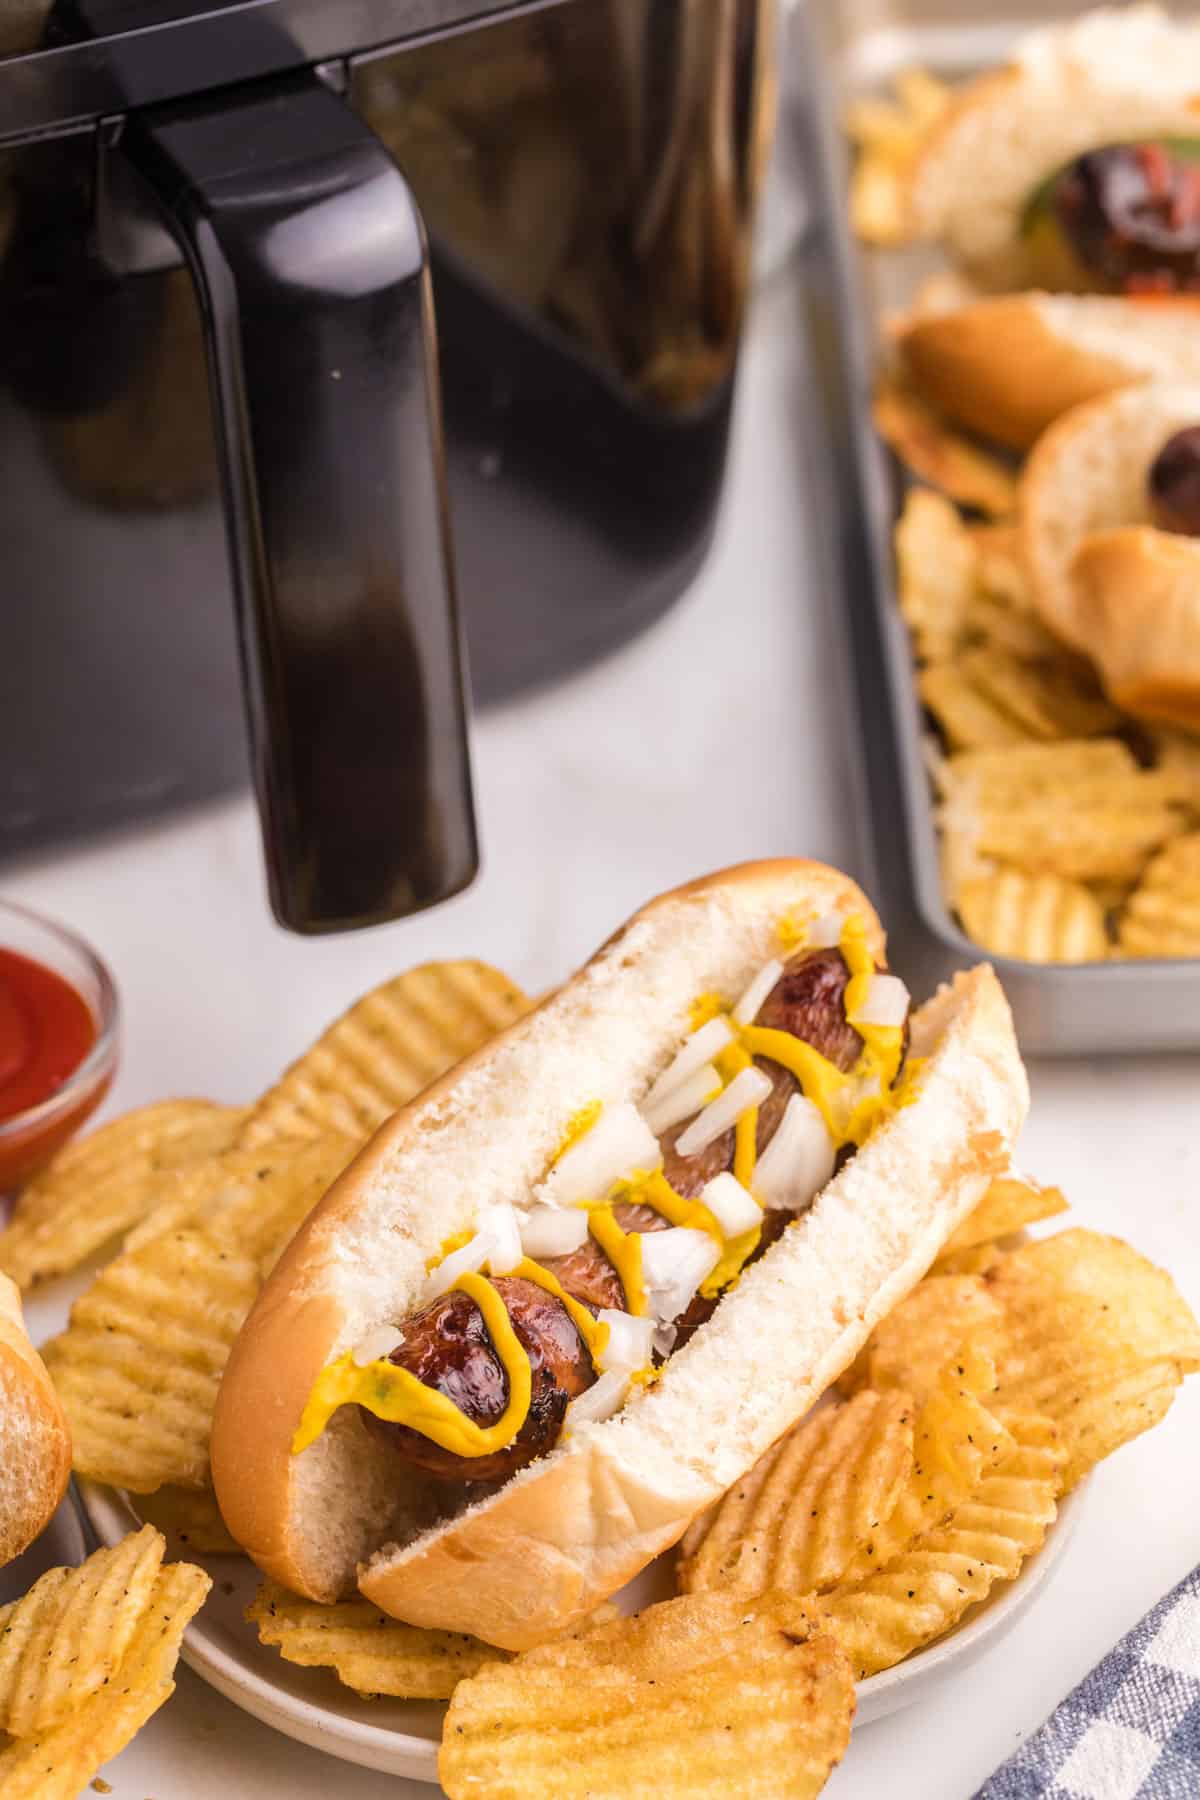 A bratwurst in a bun, loaded with onion and mustard, with potato chips.